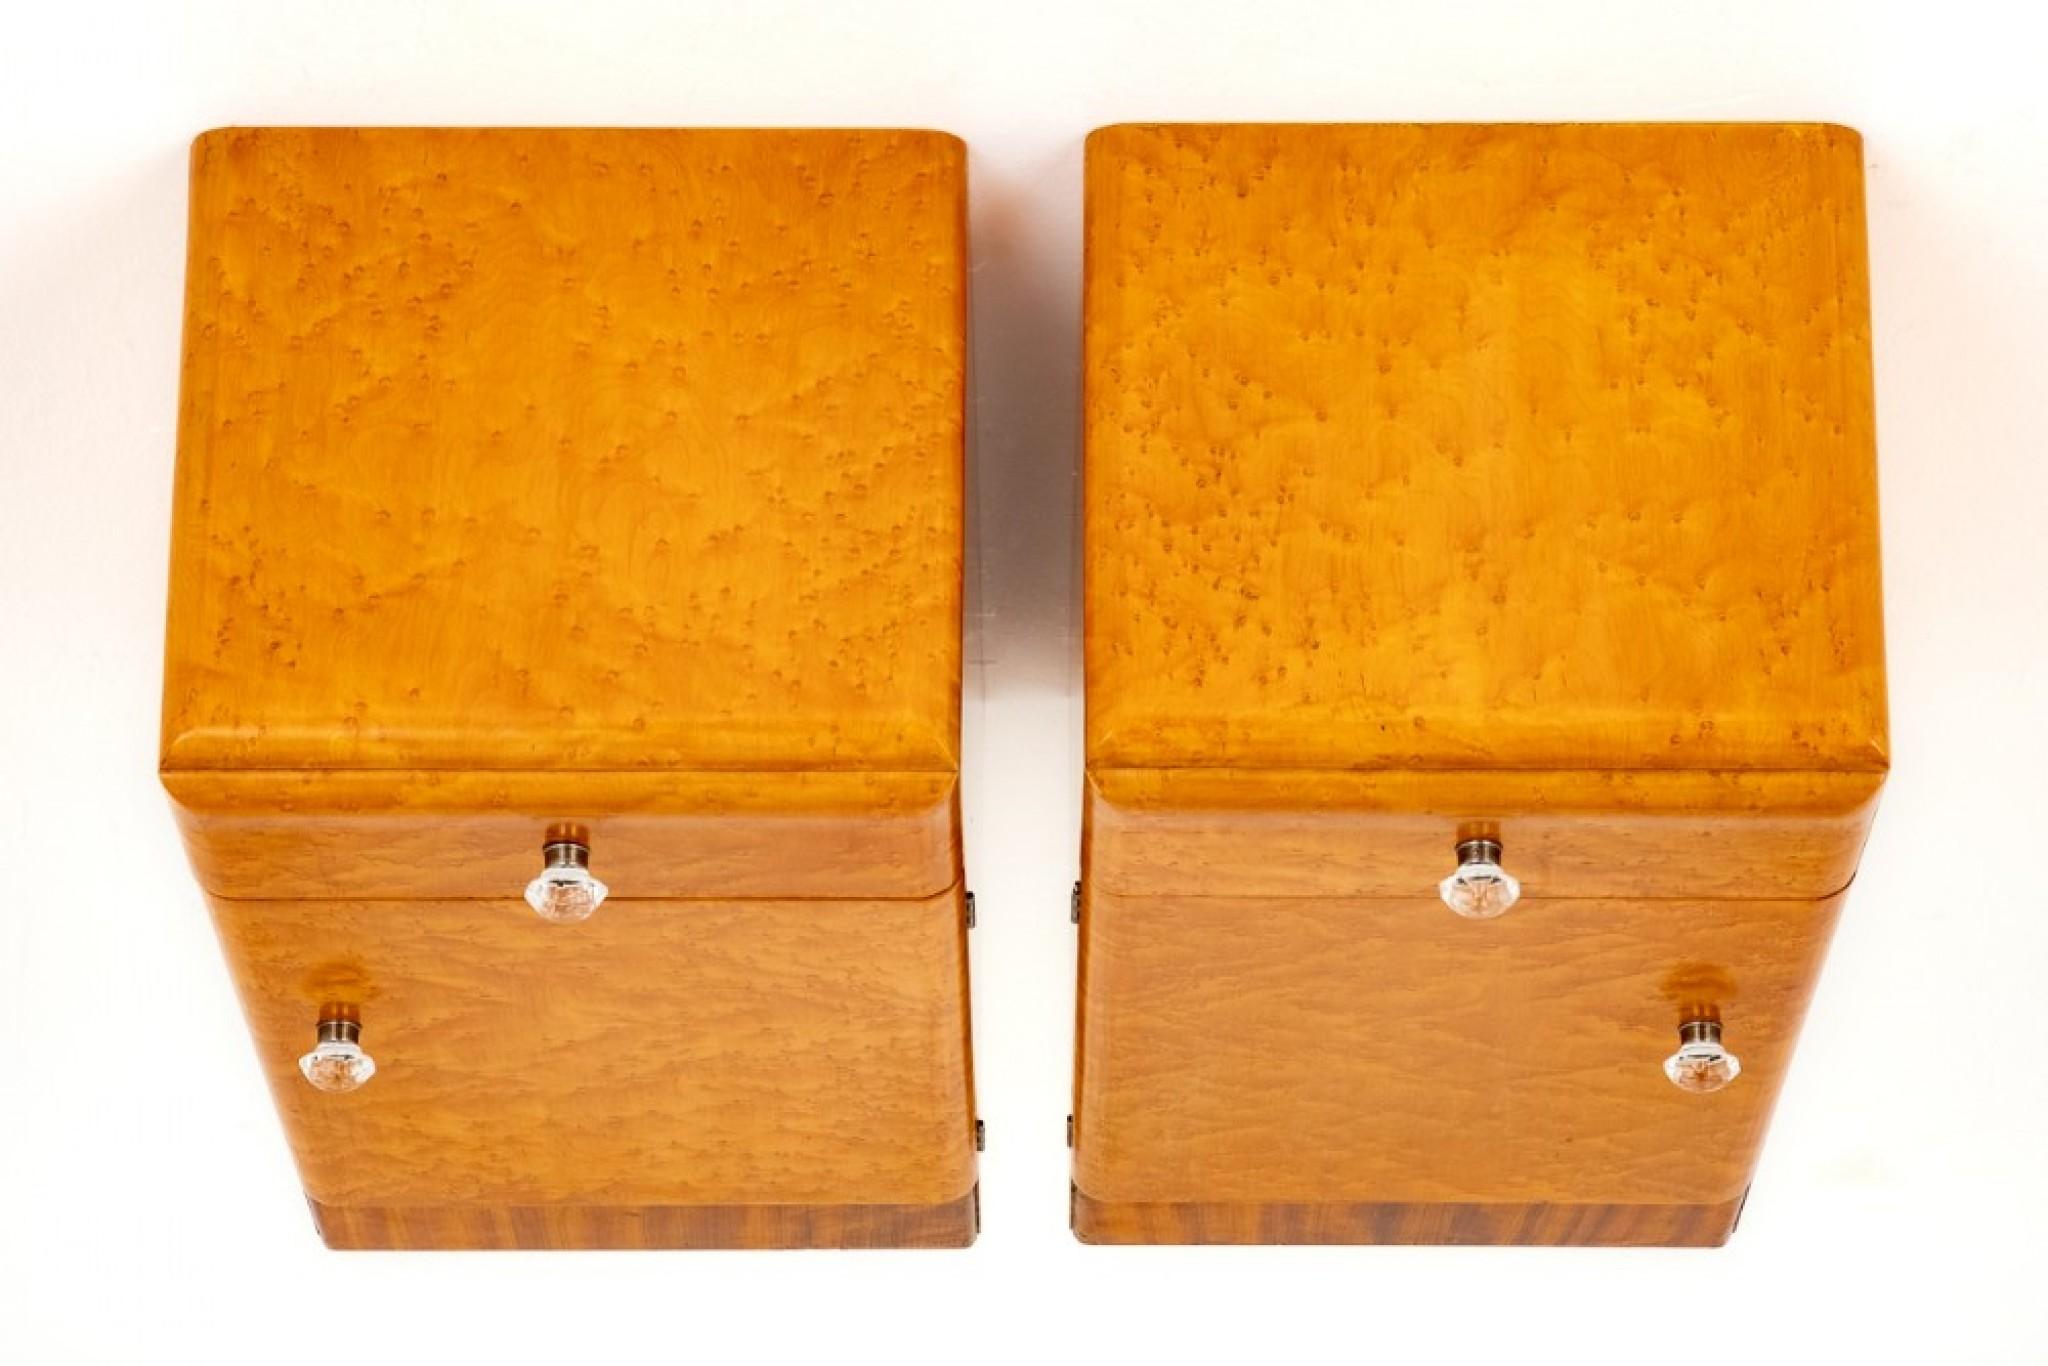 Period Art Deco Bedside Chests 1930s Nightstands In Good Condition For Sale In Potters Bar, GB